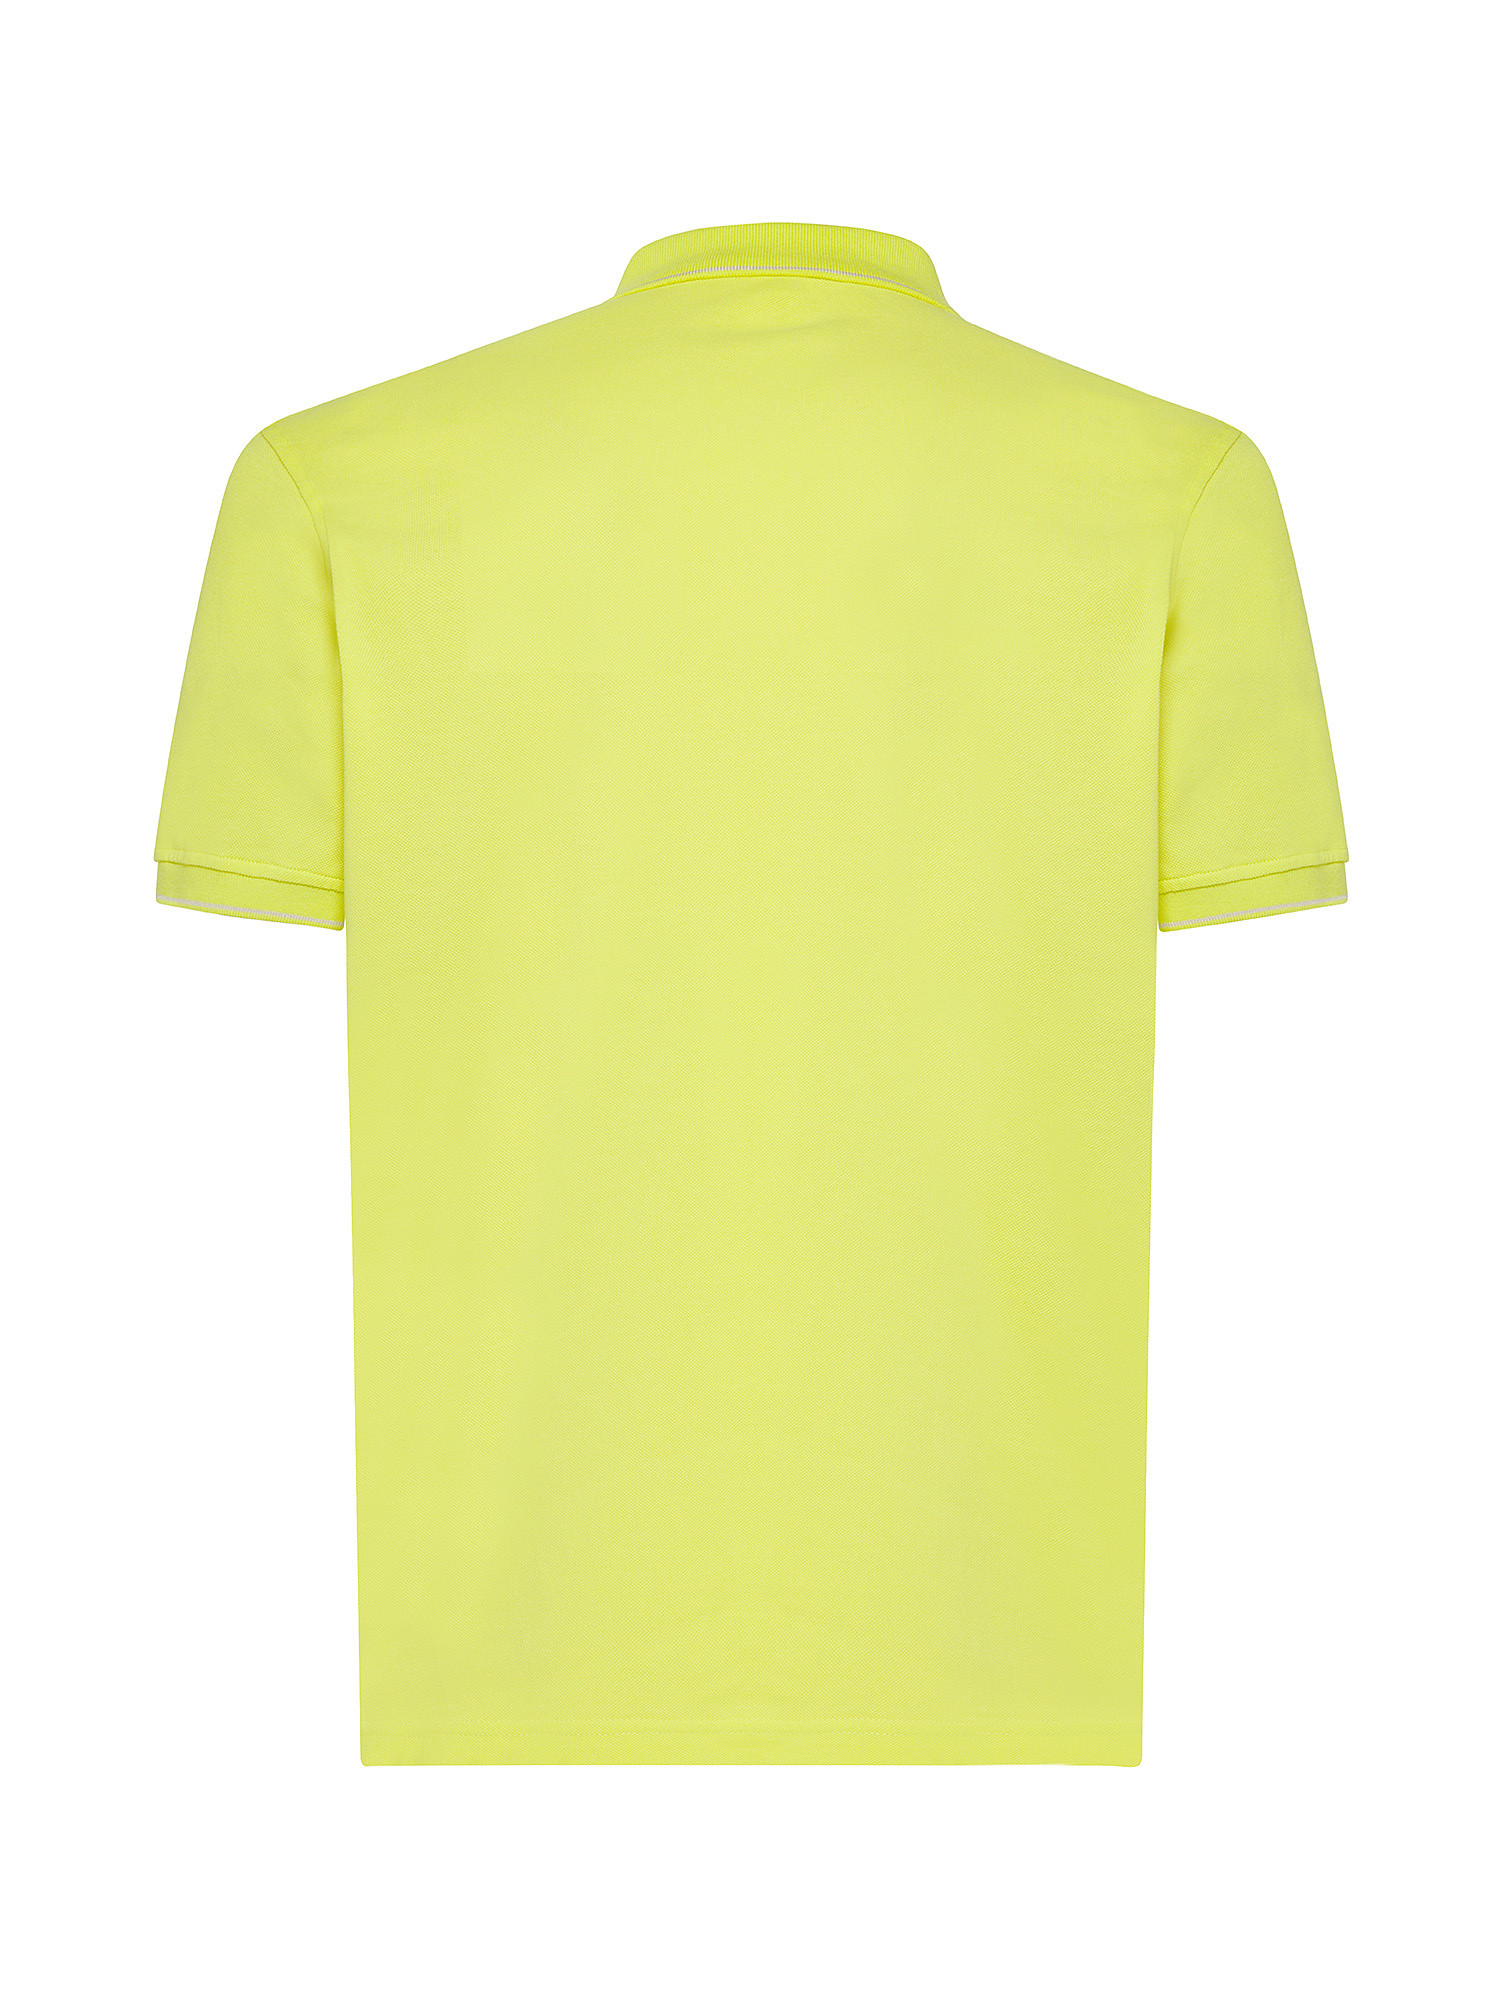 Ciesse Piumini - Piff polo shirt in cotton with logo, Yellow, large image number 1